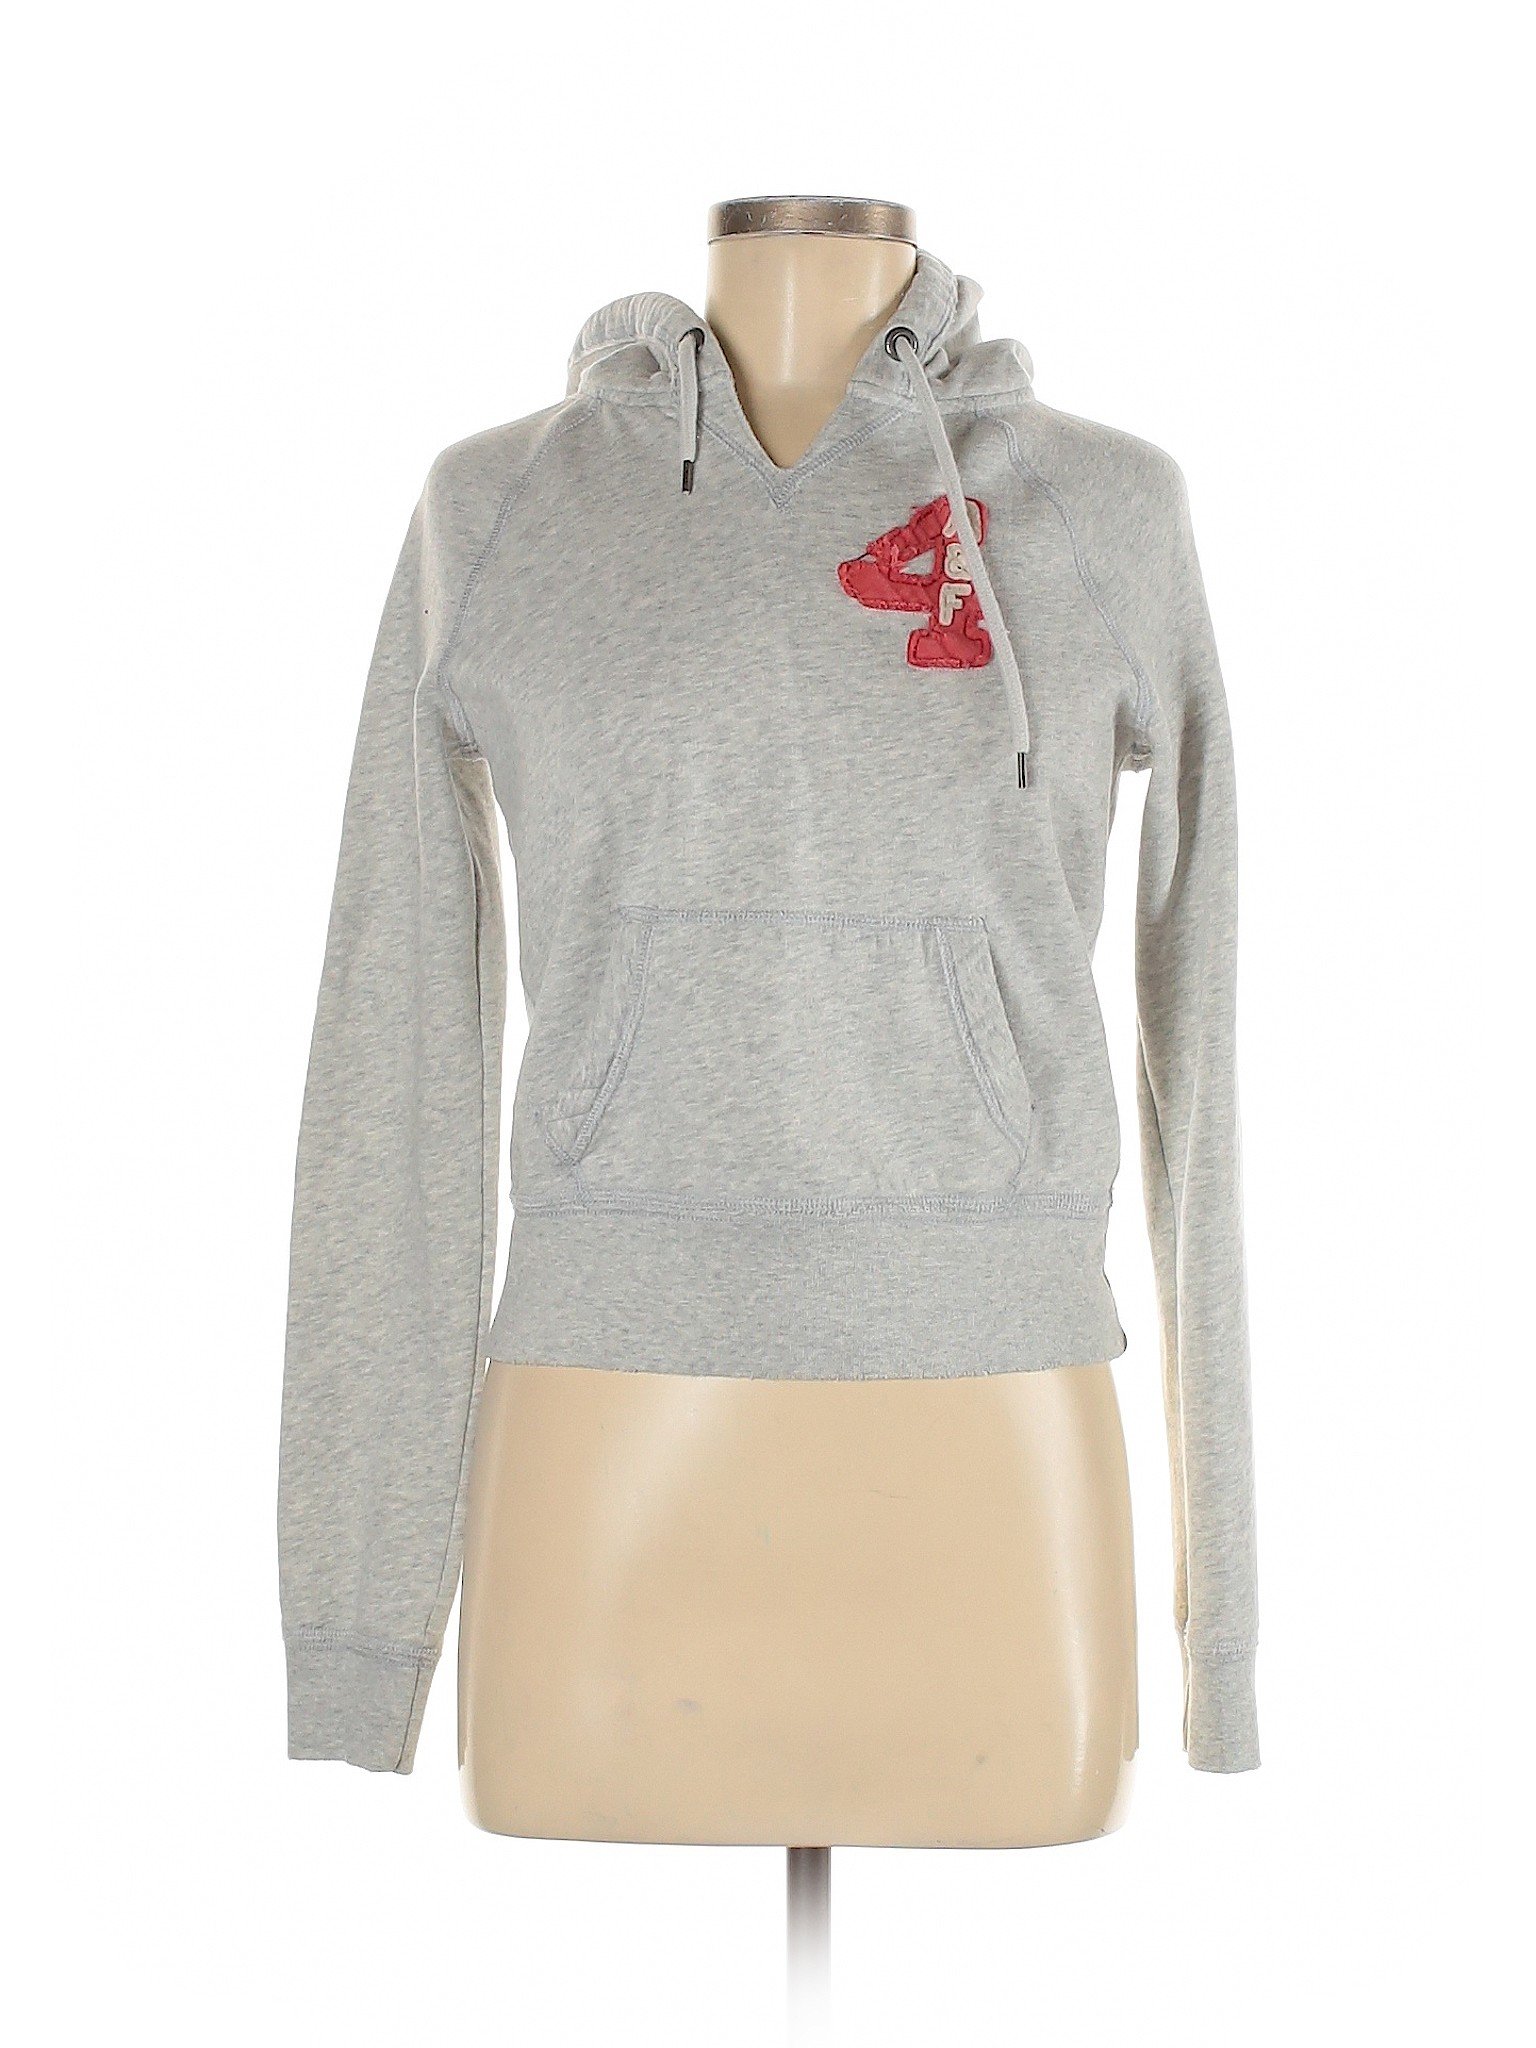 Abercrombie & Fitch Women Gray Pullover Hoodie M | eBay